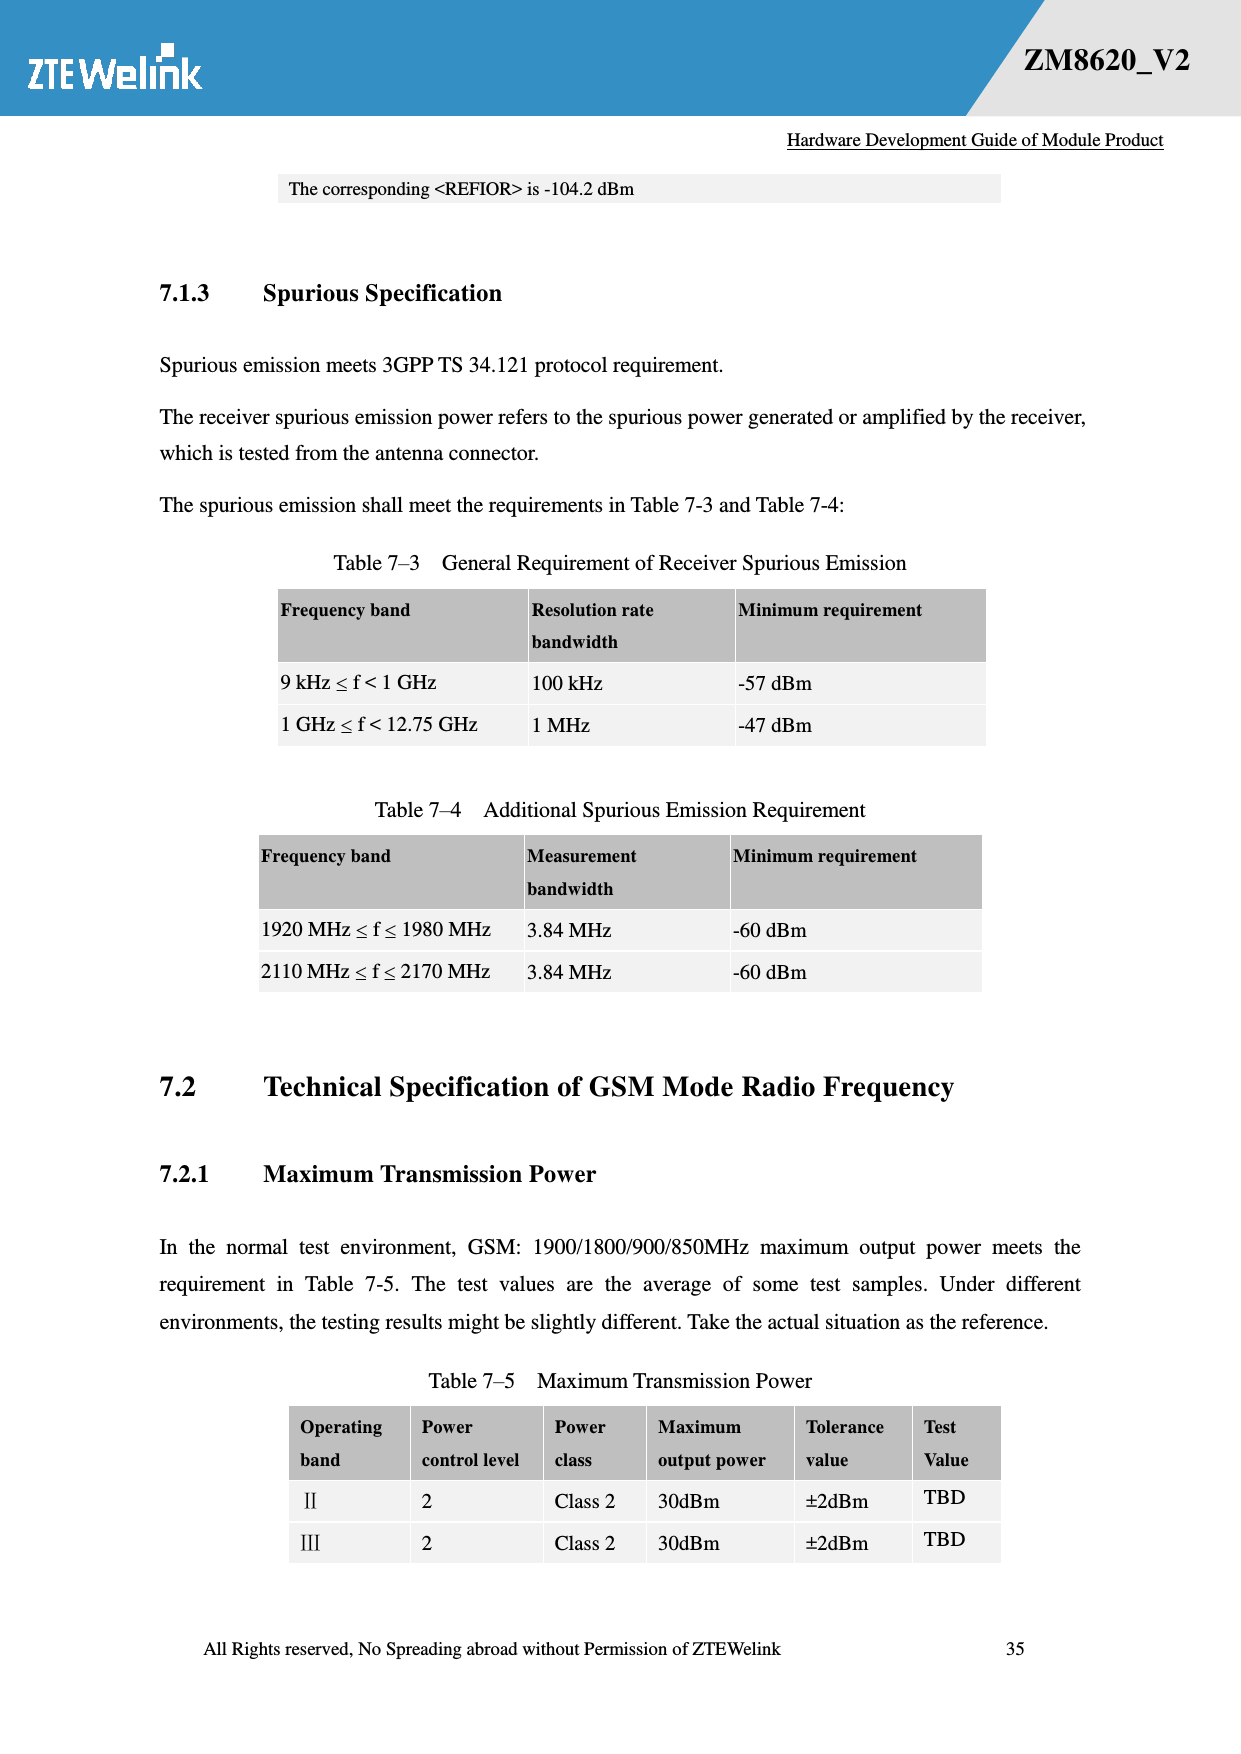   Hardware Development Guide of Module Product  All Rights reserved, No Spreading abroad without Permission of ZTEWelink              35 错误！未找到用源。    ZM8620_V2 The corresponding &lt;REFIOR&gt; is -104.2 dBm    7.1.3 Spurious Specification   Spurious emission meets 3GPP TS 34.121 protocol requirement.   The receiver spurious emission power refers to the spurious power generated or amplified by the receiver, which is tested from the antenna connector. The spurious emission shall meet the requirements in Table 7-3 and Table 7-4: Table 7–3    General Requirement of Receiver Spurious Emission Frequency band Resolution rate bandwidth Minimum requirement 9 kHz  f &lt; 1 GHz 100 kHz -57 dBm 1 GHz  f &lt; 12.75 GHz 1 MHz -47 dBm  Table 7–4    Additional Spurious Emission Requirement Frequency band Measurement bandwidth Minimum requirement 1920 MHz  f  1980 MHz 3.84 MHz -60 dBm 2110 MHz  f  2170 MHz 3.84 MHz -60 dBm  7.2 Technical Specification of GSM Mode Radio Frequency   7.2.1 Maximum Transmission Power In  the  normal  test  environment,  GSM:  1900/1800/900/850MHz  maximum  output  power  meets  the requirement  in  Table  7-5.  The  test  values  are  the  average  of  some  test  samples.  Under  different environments, the testing results might be slightly different. Take the actual situation as the reference. Table 7–5  Maximum Transmission Power Operating band Power control level Power class Maximum output power Tolerance value Test Value  2 Class 2 30dBm ±2dBm TBD  2 Class 2 30dBm ±2dBm TBD 